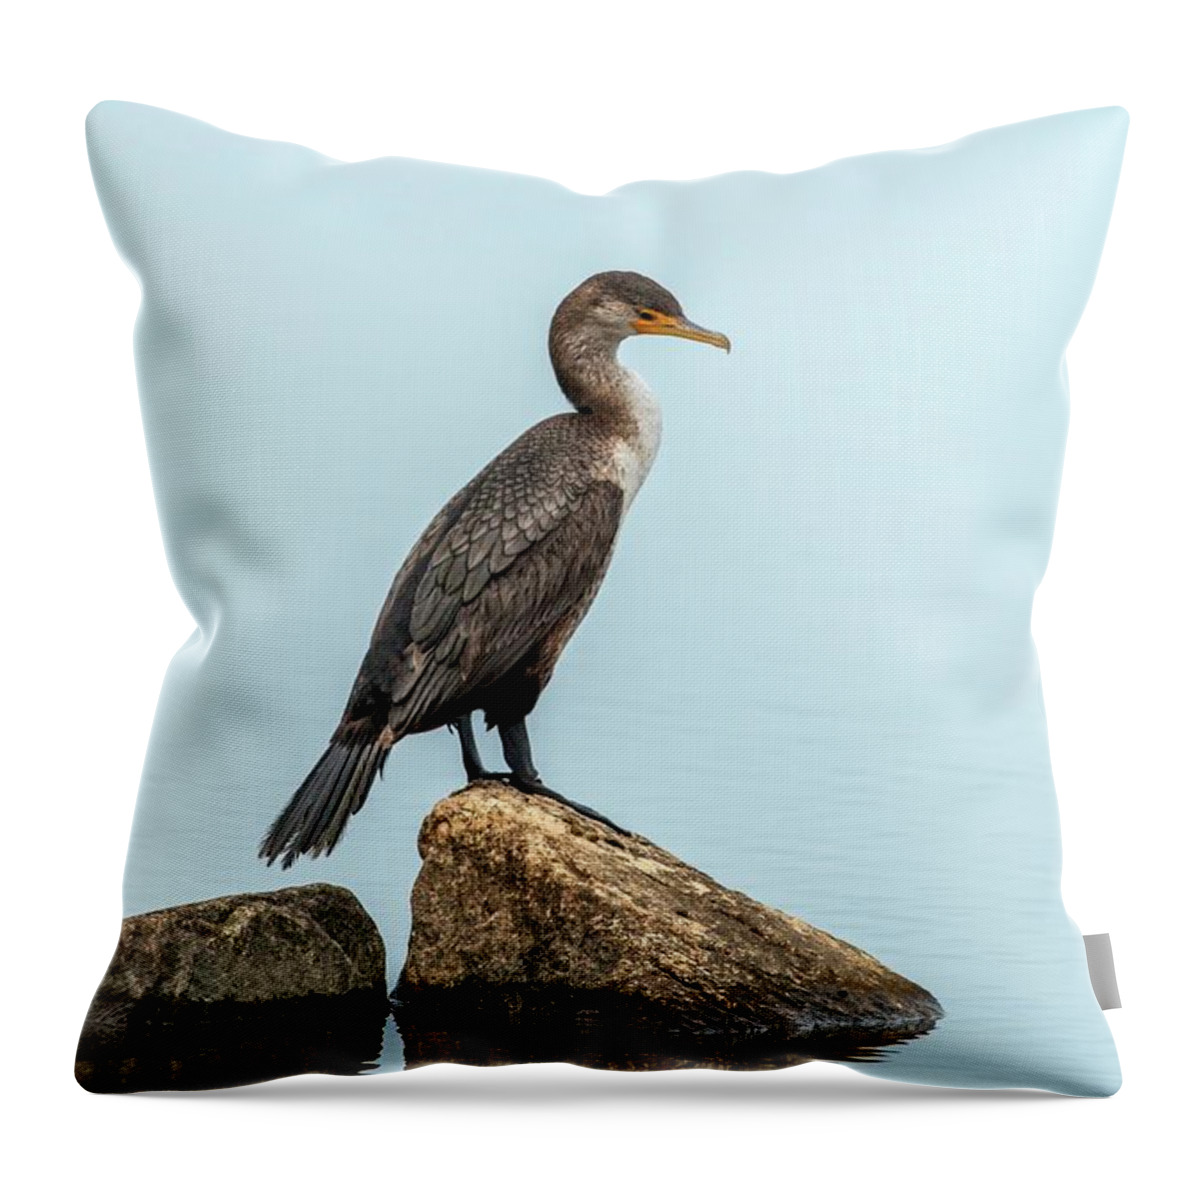 Breakwater Throw Pillow featuring the photograph Peaceful Double-Crested Cormorant by Liza Eckardt